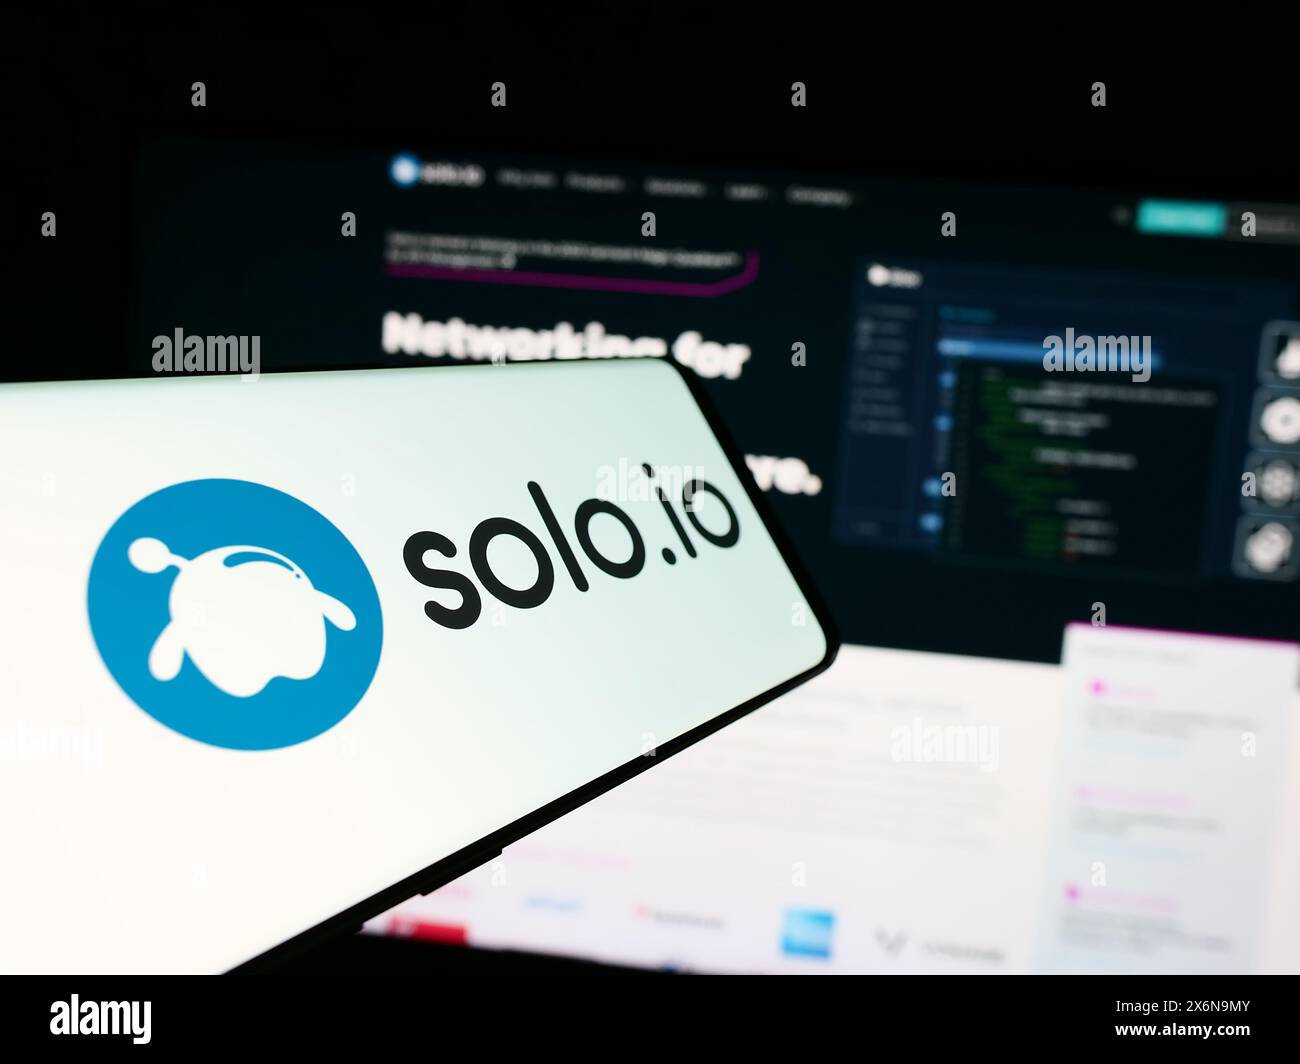 Mobile phone with logo of American networking platform company Solo.io Inc. in front of business website. Focus on center of phone display. Stock Photo